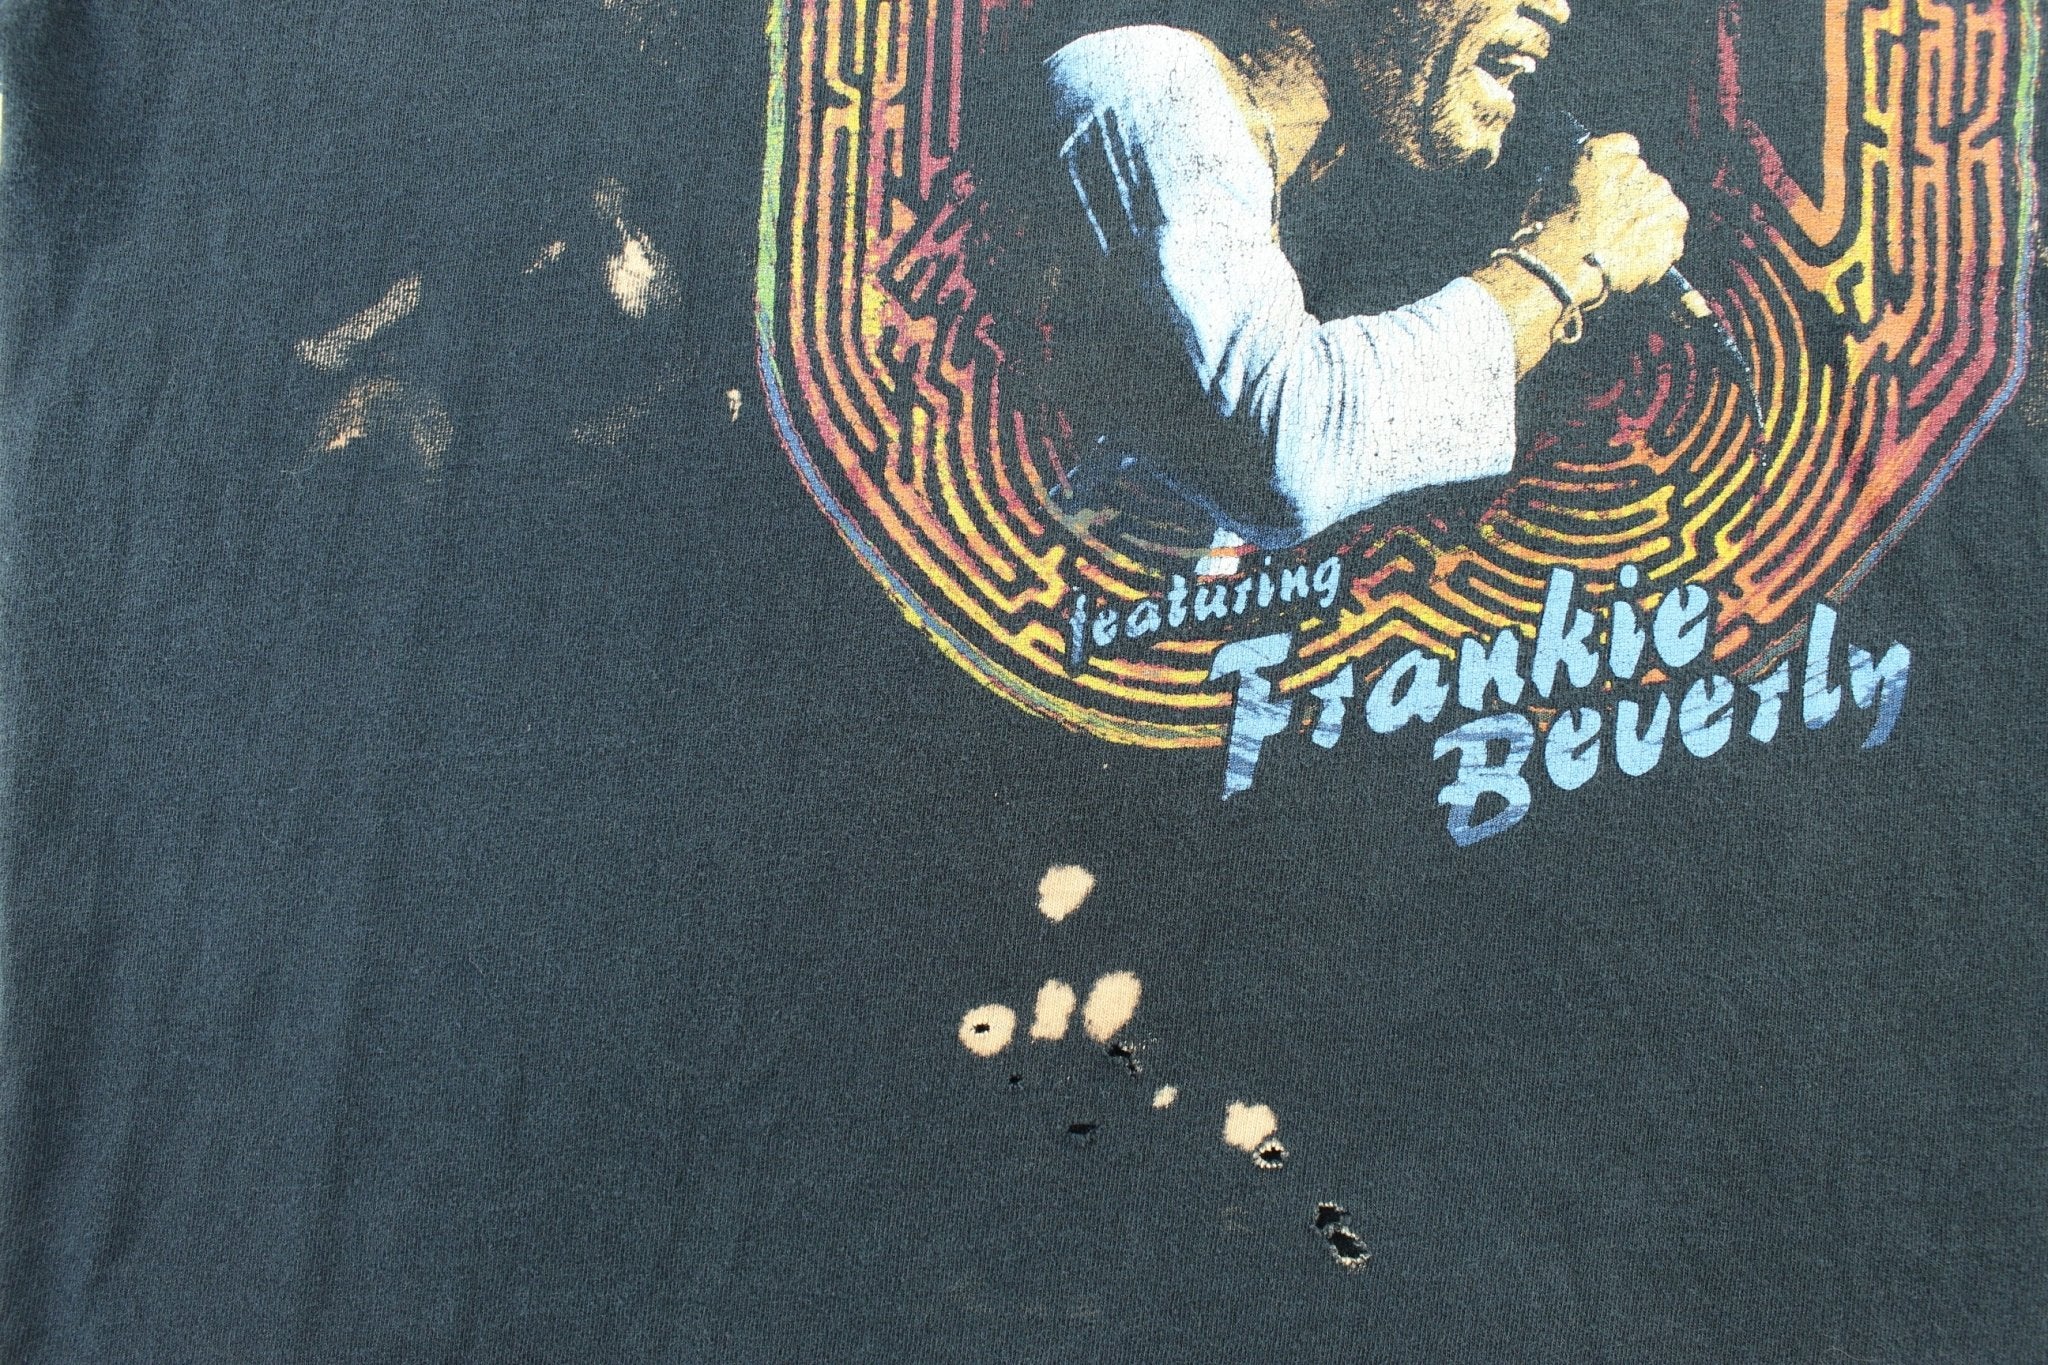 00's Maze featuring Frankie Beverly Golden Time of Day T-Shirt - ThriftedThreads.com